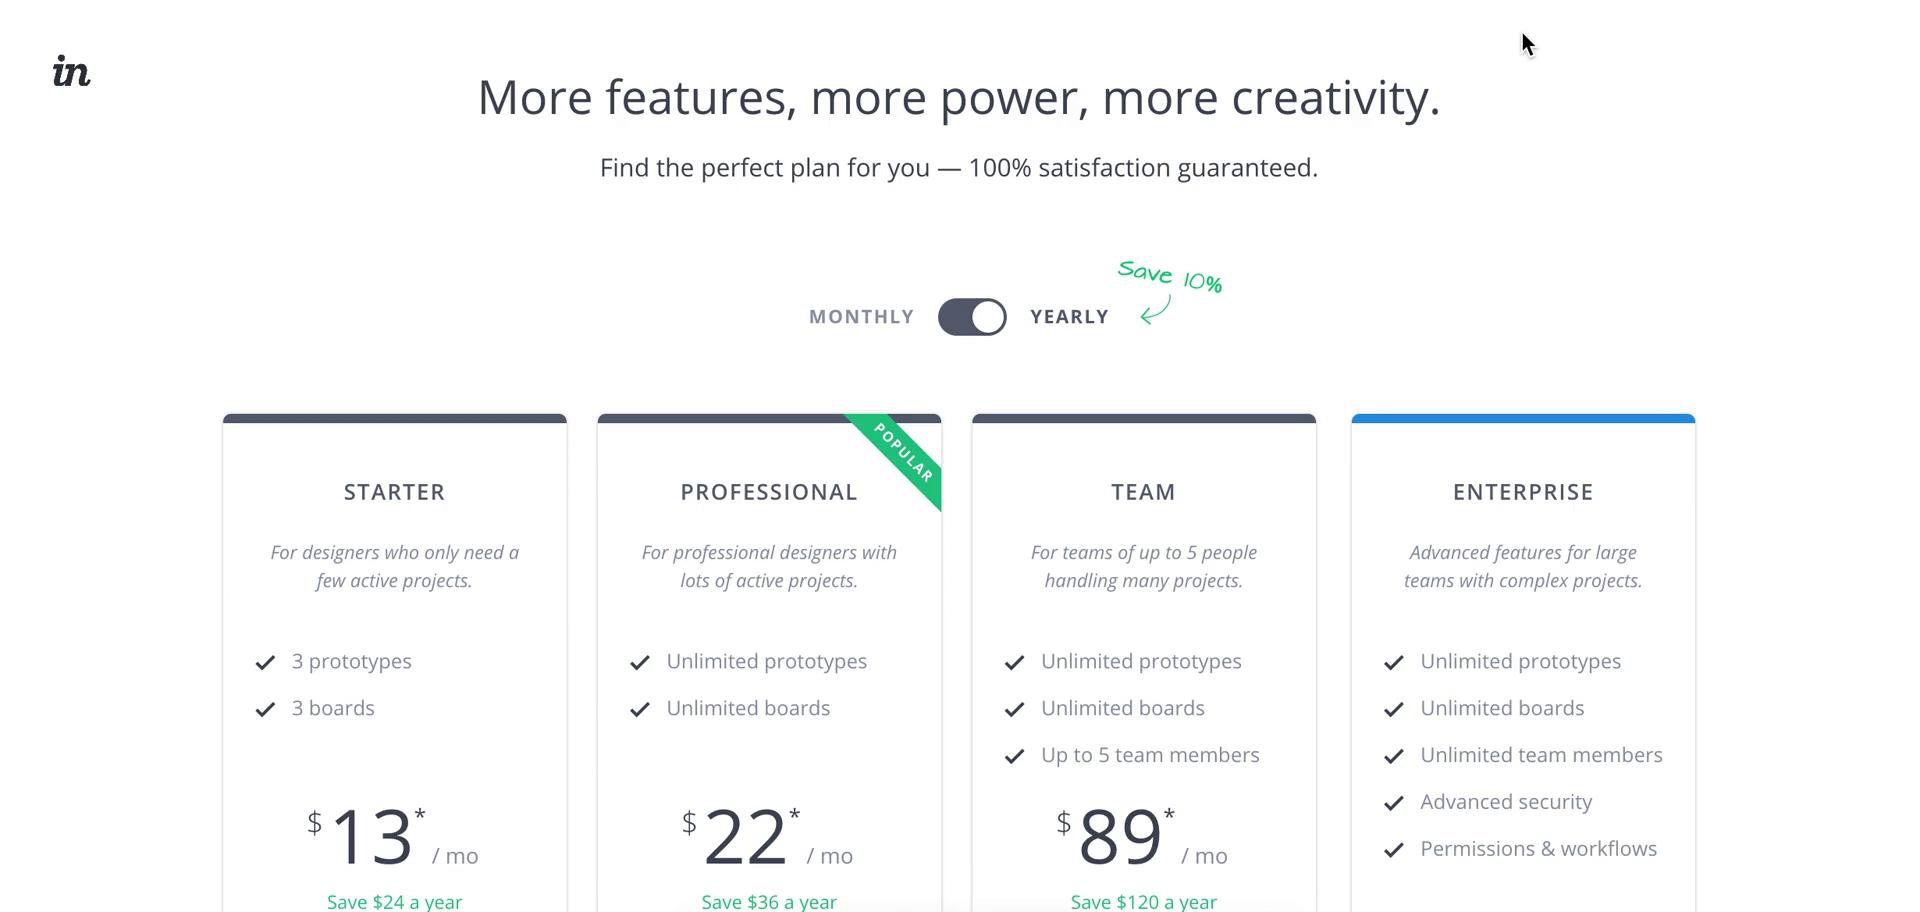 Screenshot of Pricing & plans on Upgrading your account on InVision user flow